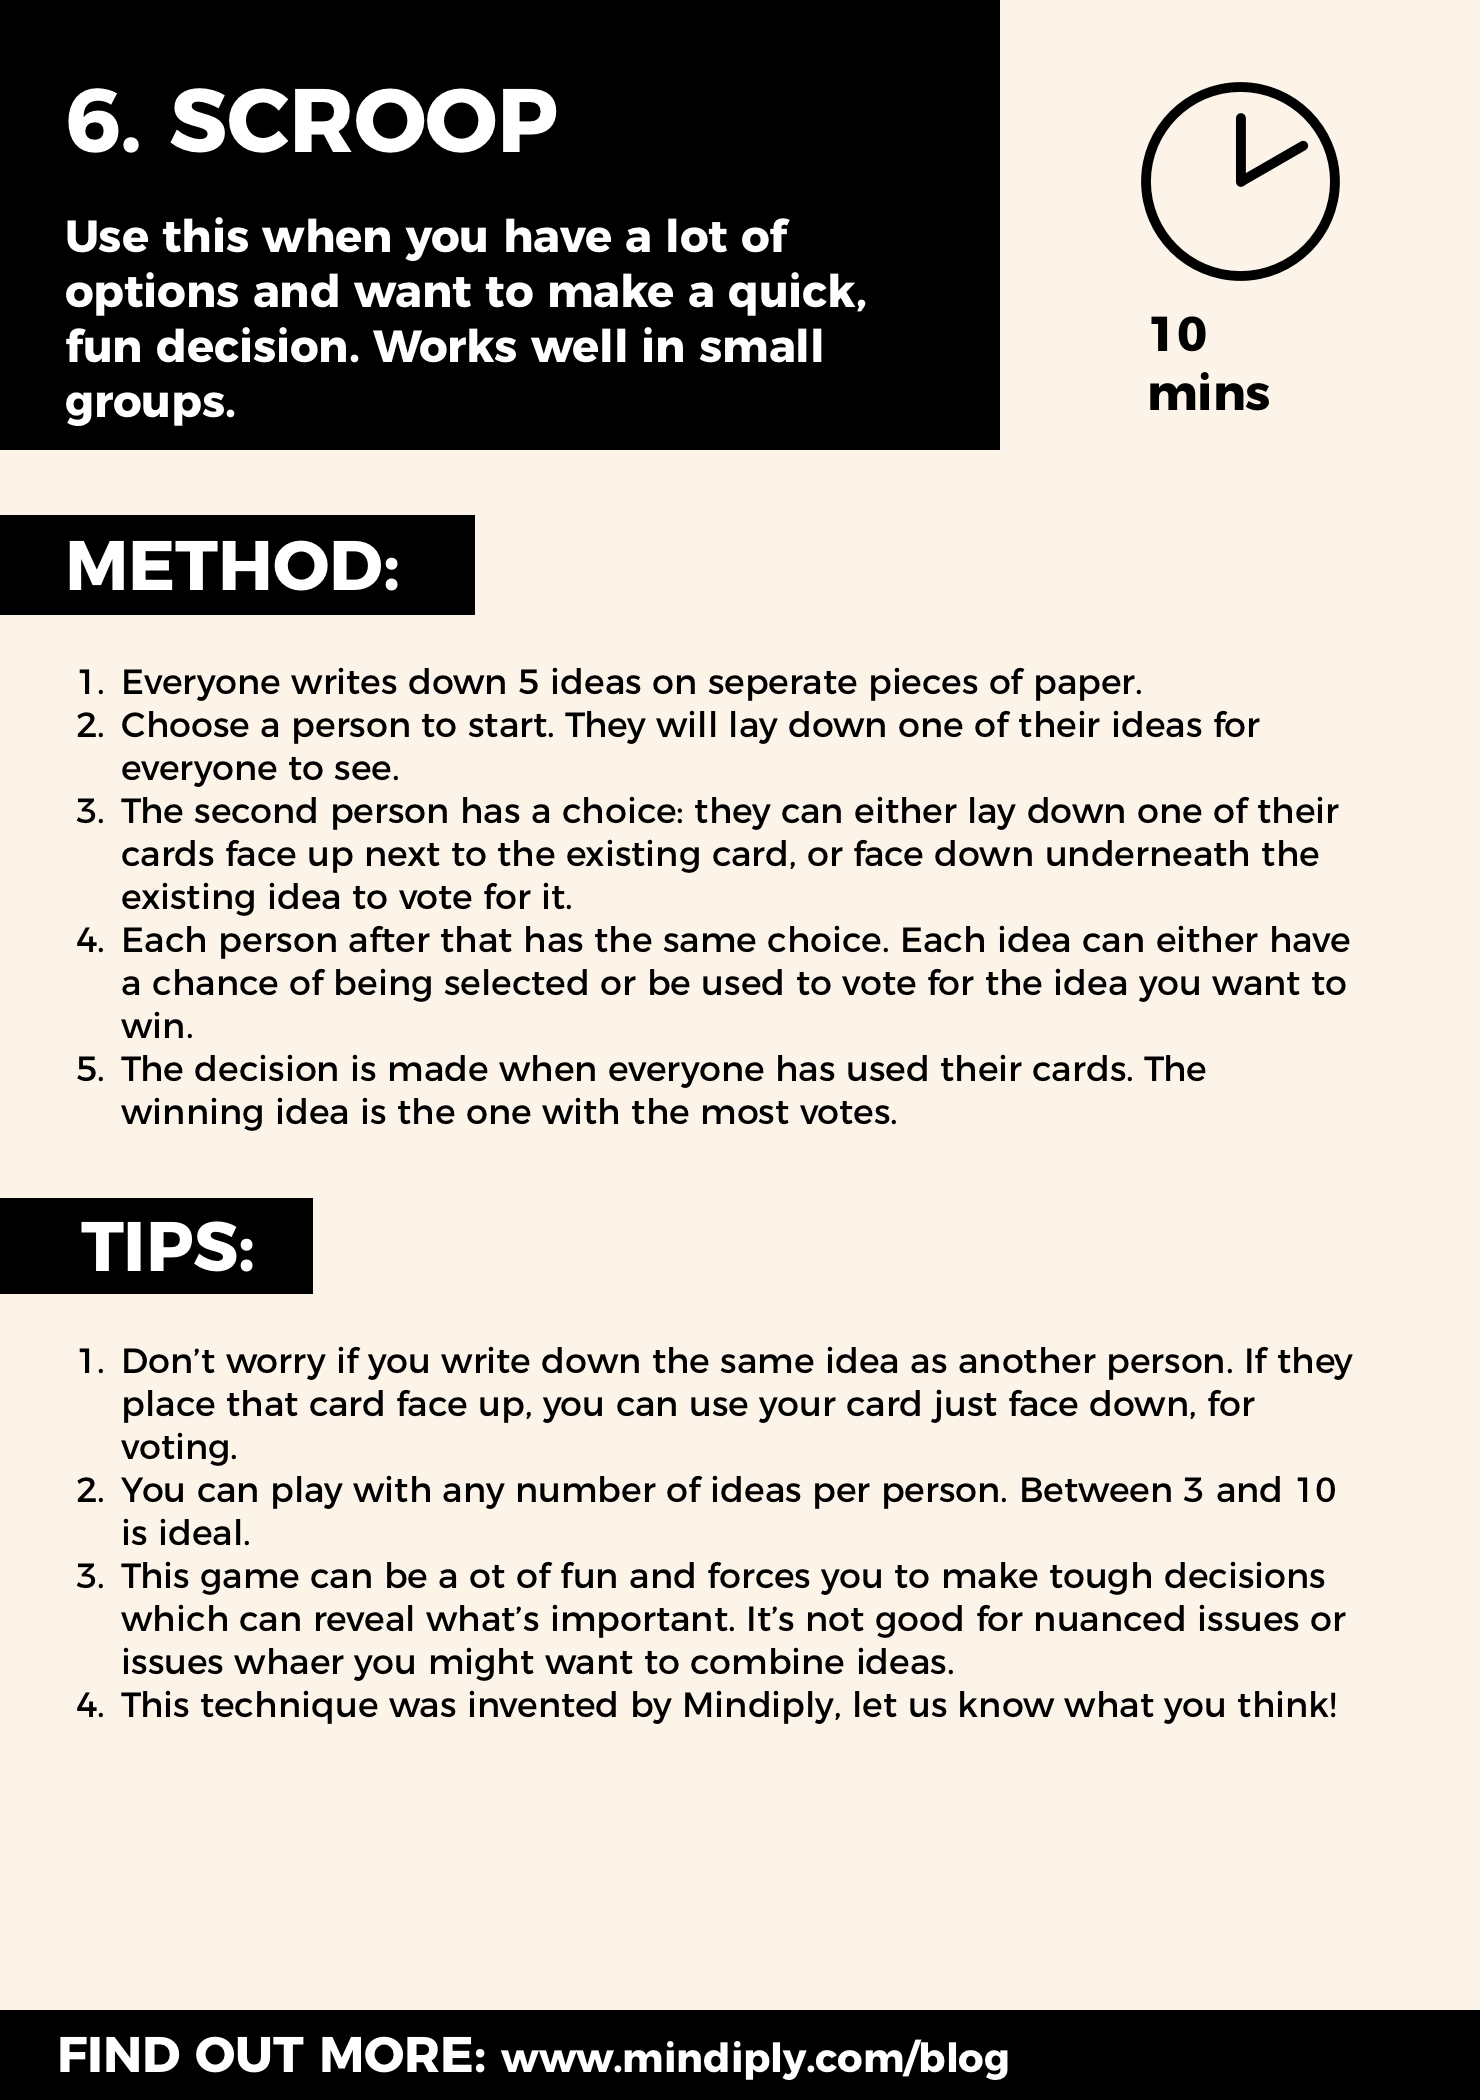 Decision making technique reference card - Scroop game method and tips